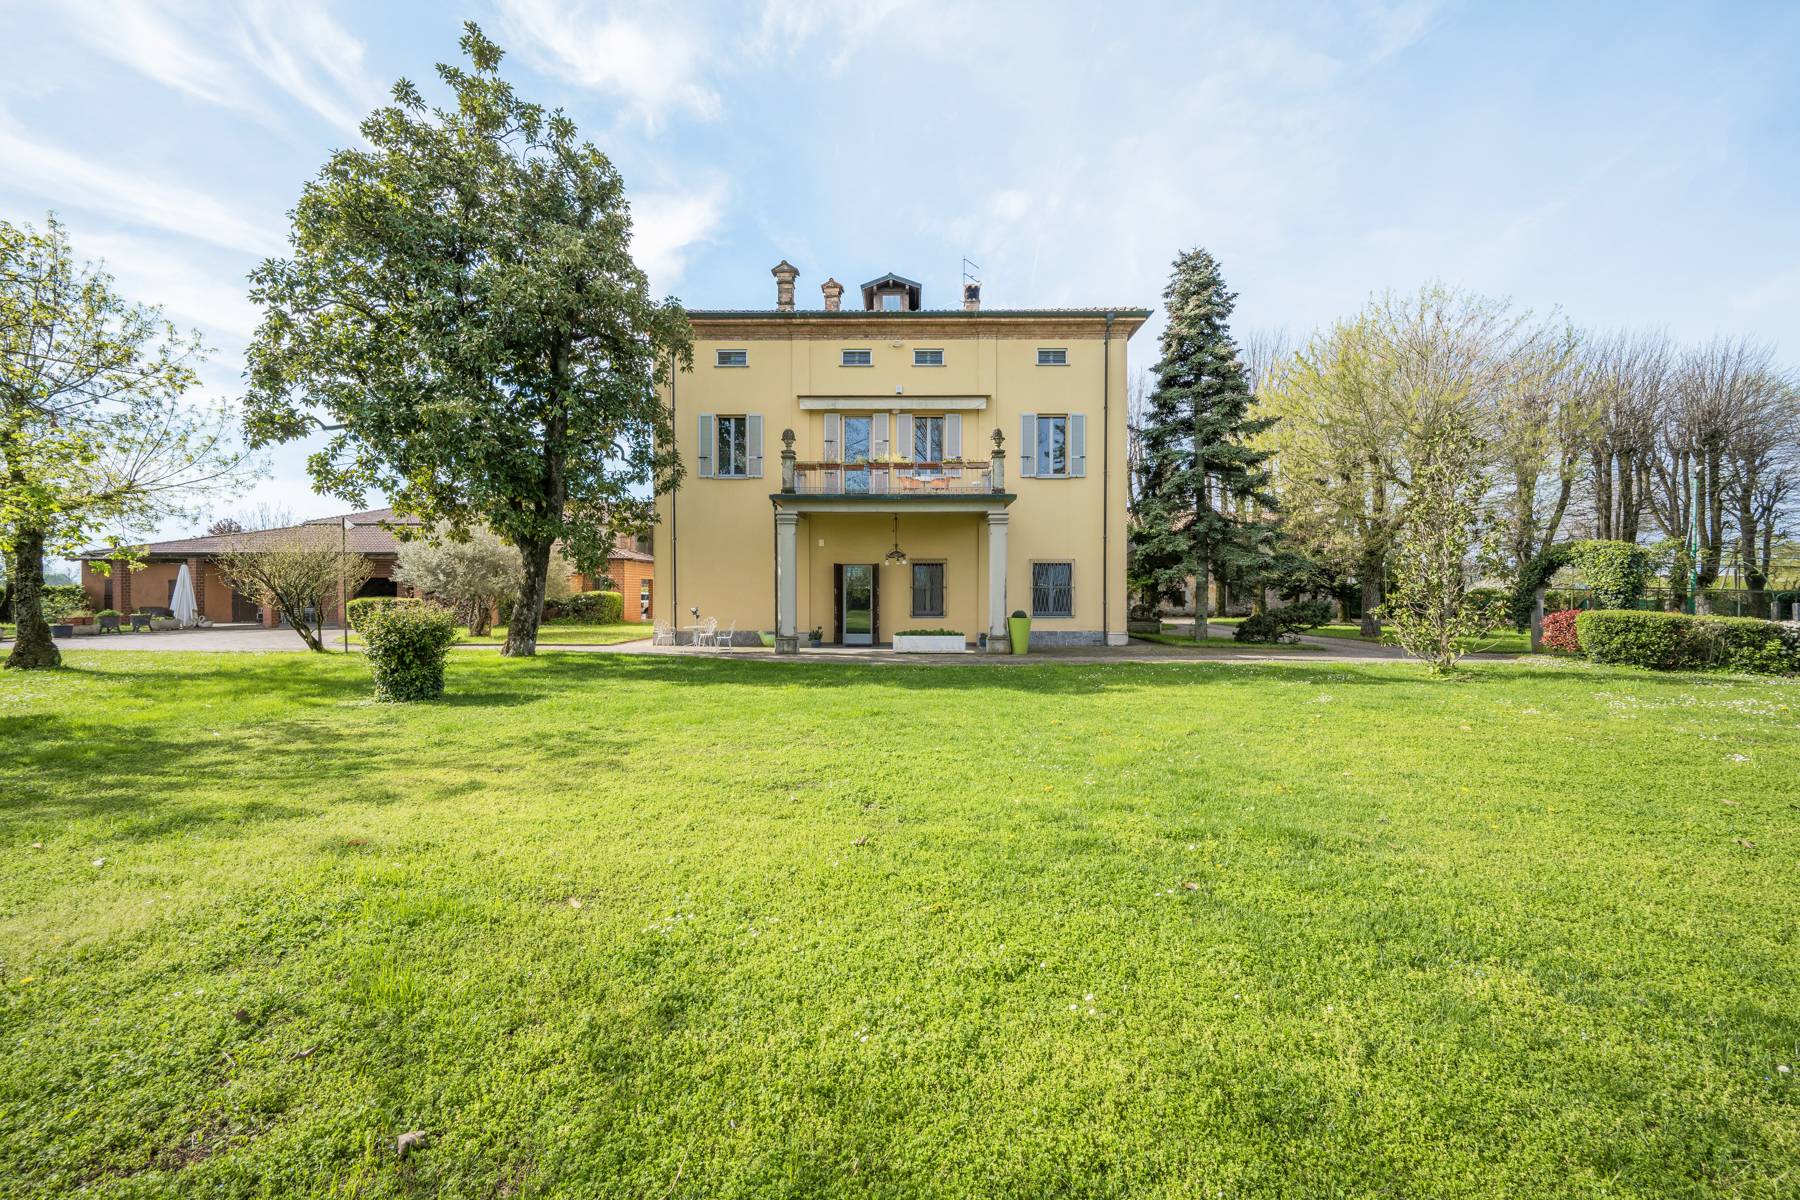 Exclusive 19th-century villa with garden and pool.